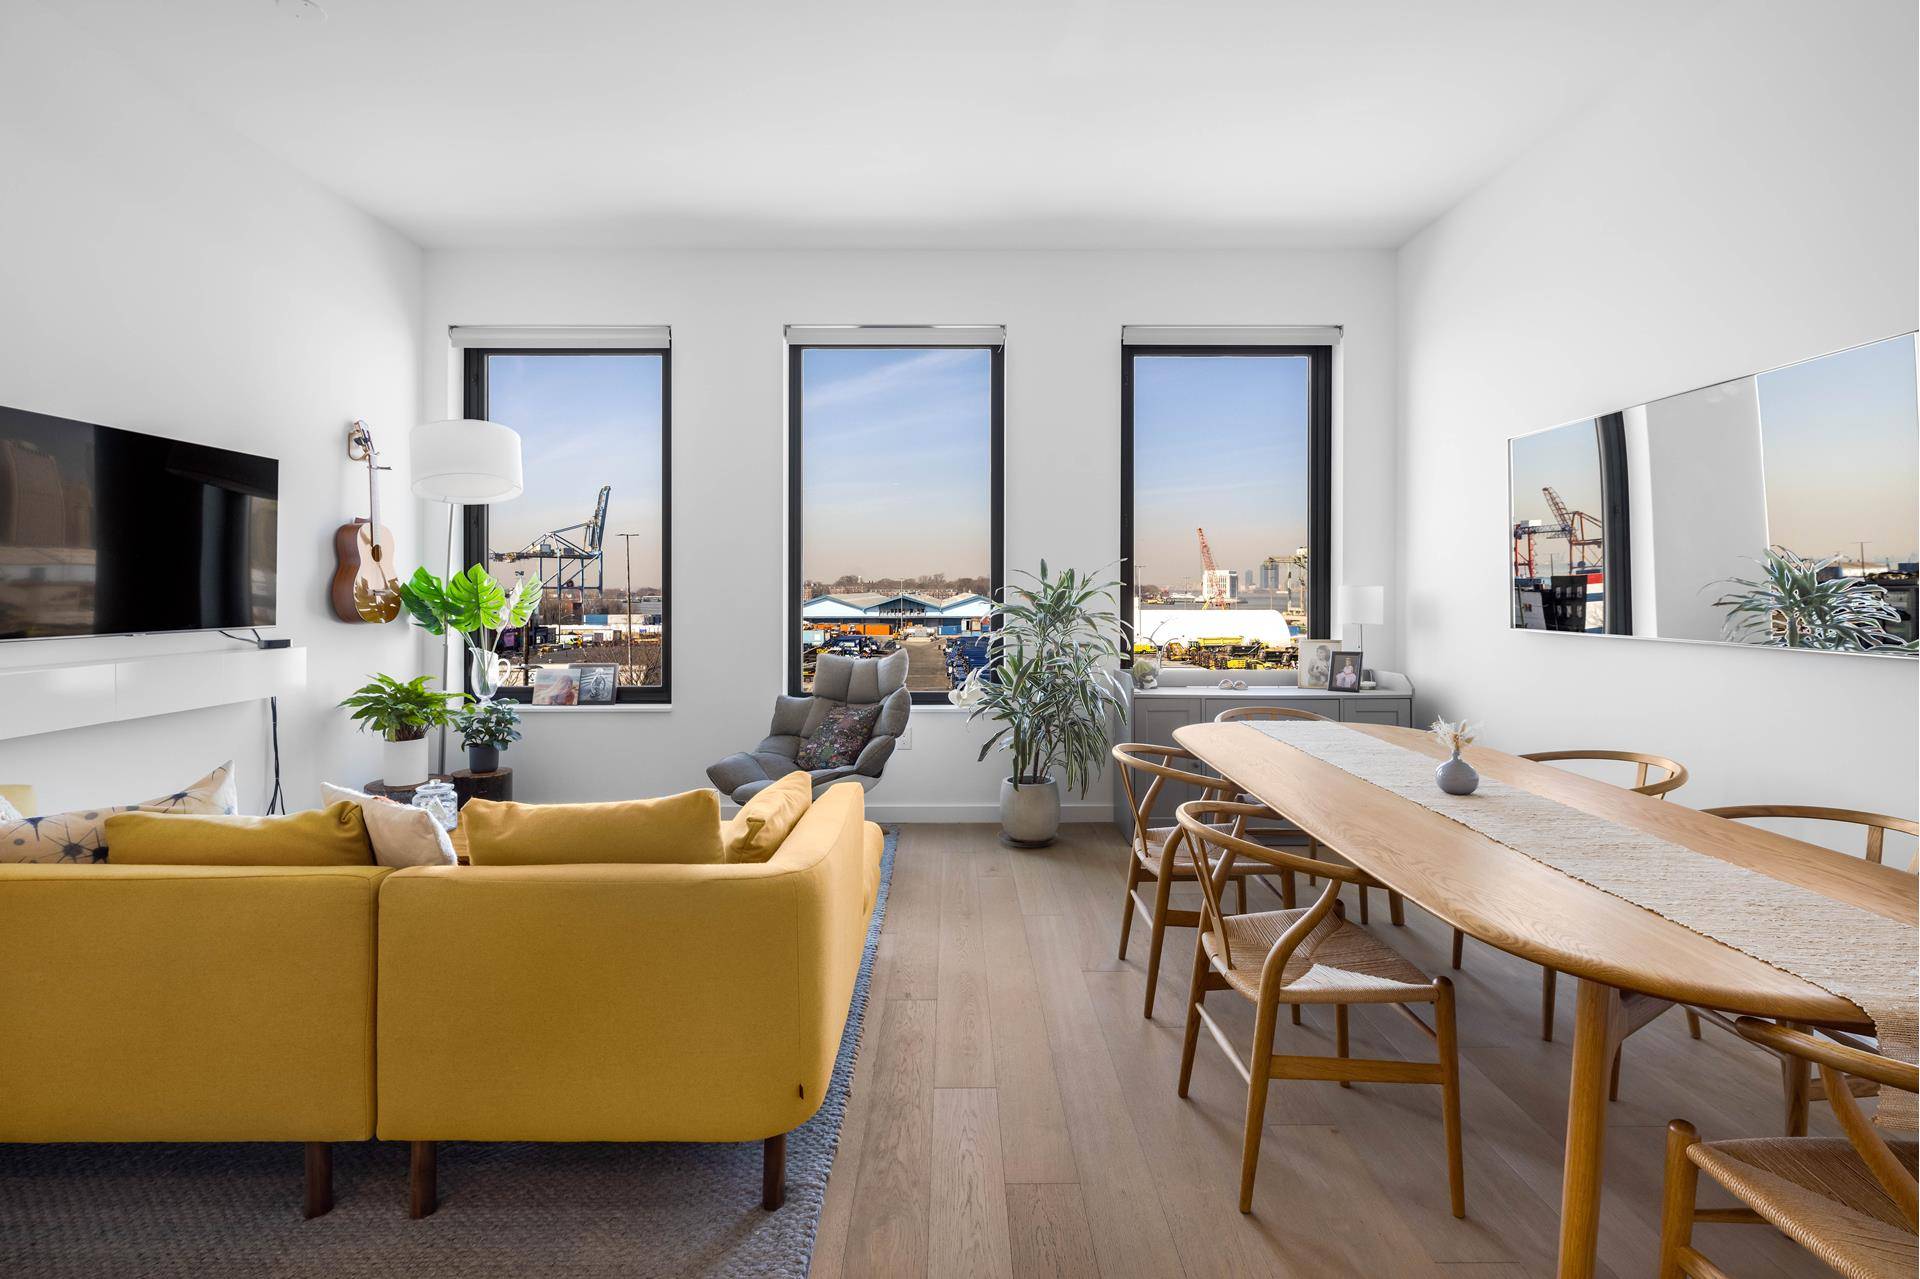 Boasting three private outdoor private spaces along the waterfront in Cobble Hill, PHA embodies refined luxury living in an intimate boutique condo setting.